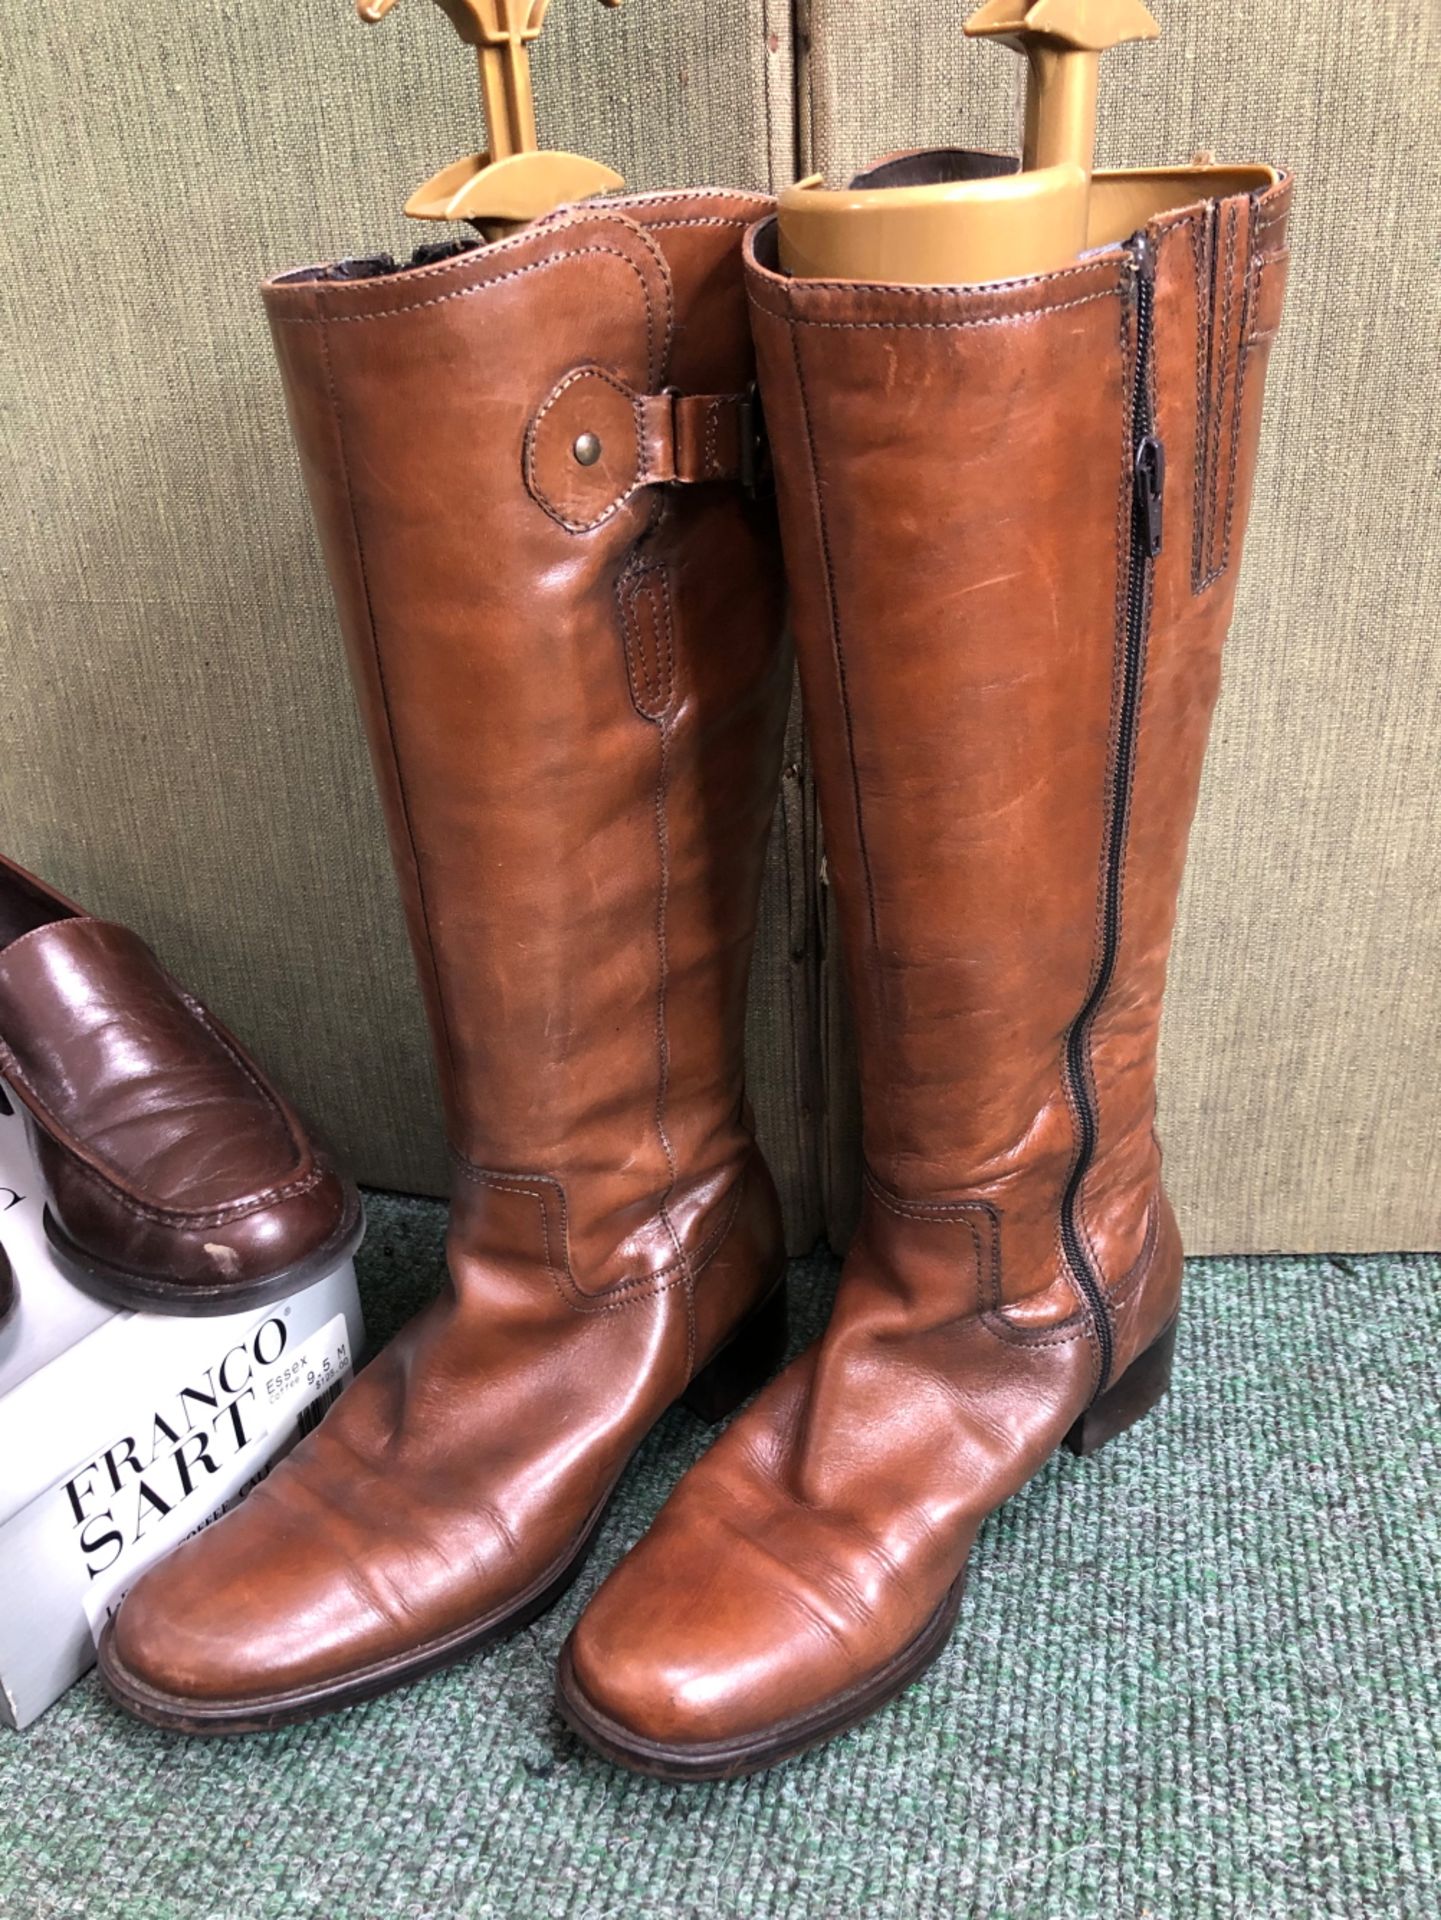 BOOTS. A LONG PAIR OF YOUR SIXTH SENSE BROWN BOOTS SIZE EUR 40, TOGETHER WITH A PAIR OF FRANCO SARTO - Bild 2 aus 7